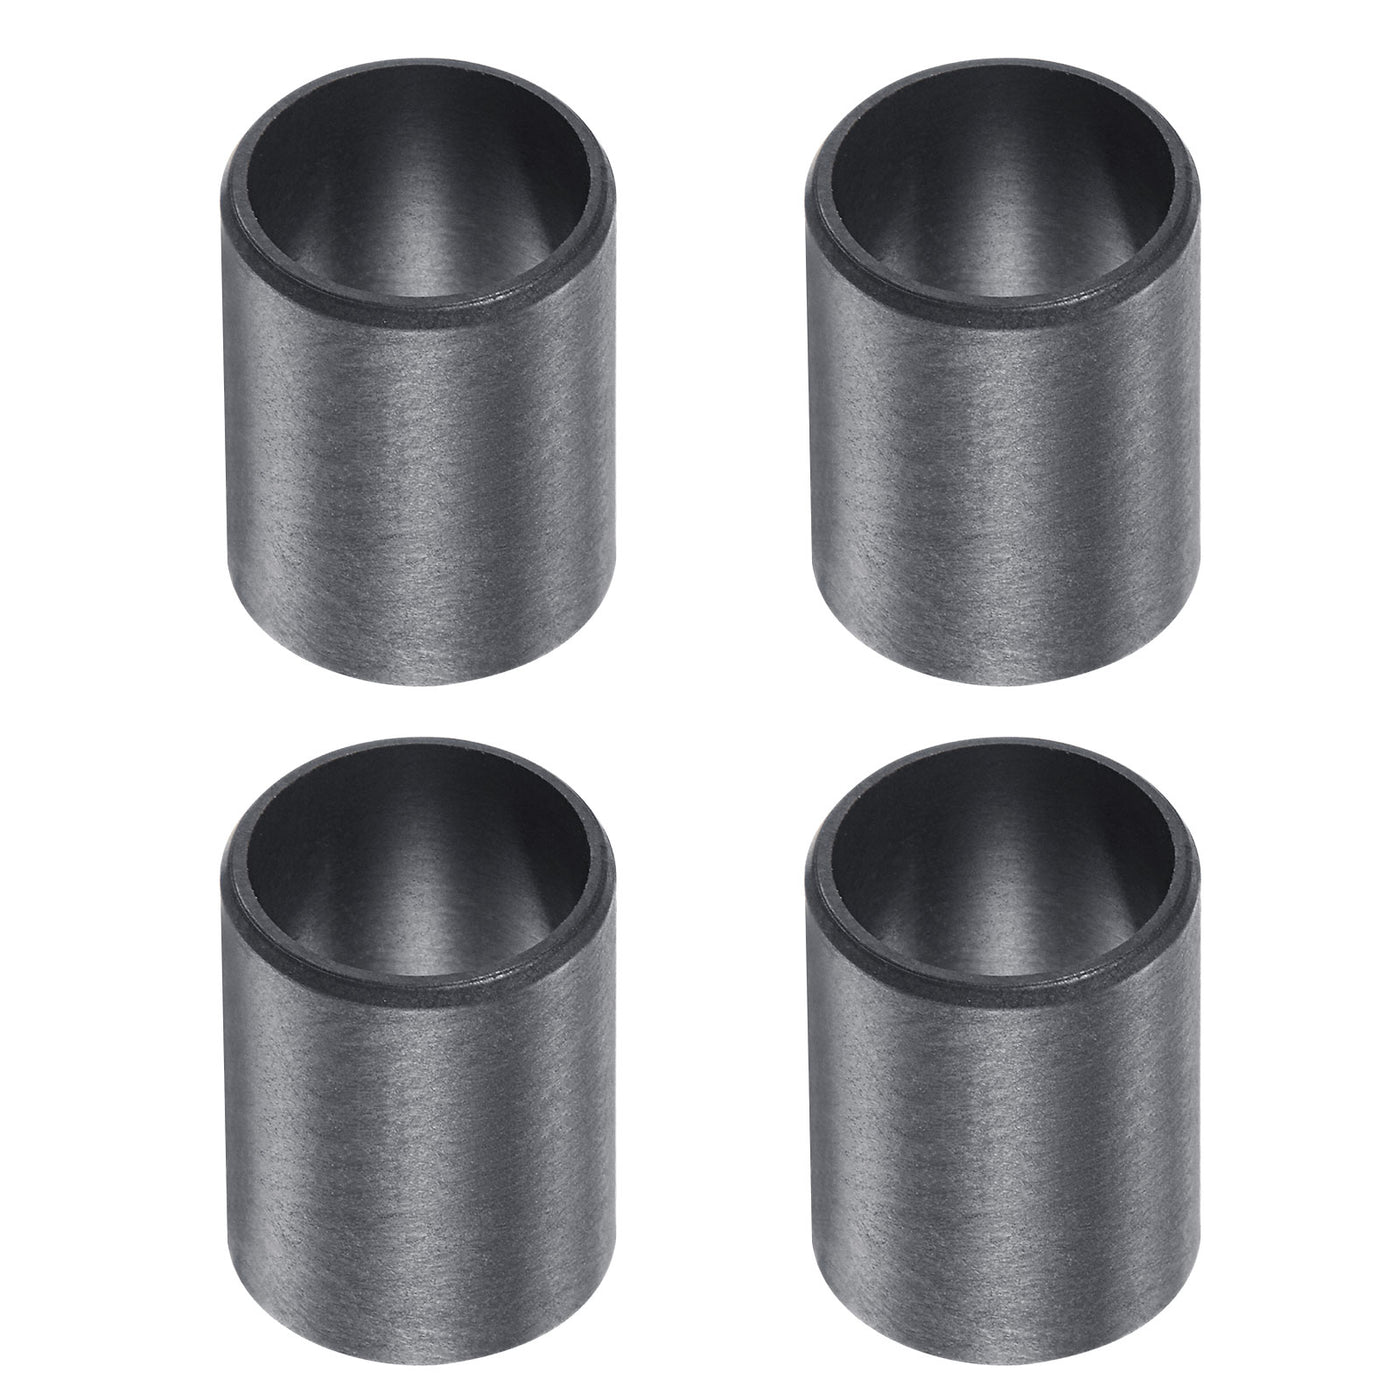 uxcell Uxcell Sleeve Bearings 12mmx14mmx20mm POM Wrapped Oilless Bushings Black 4pcs